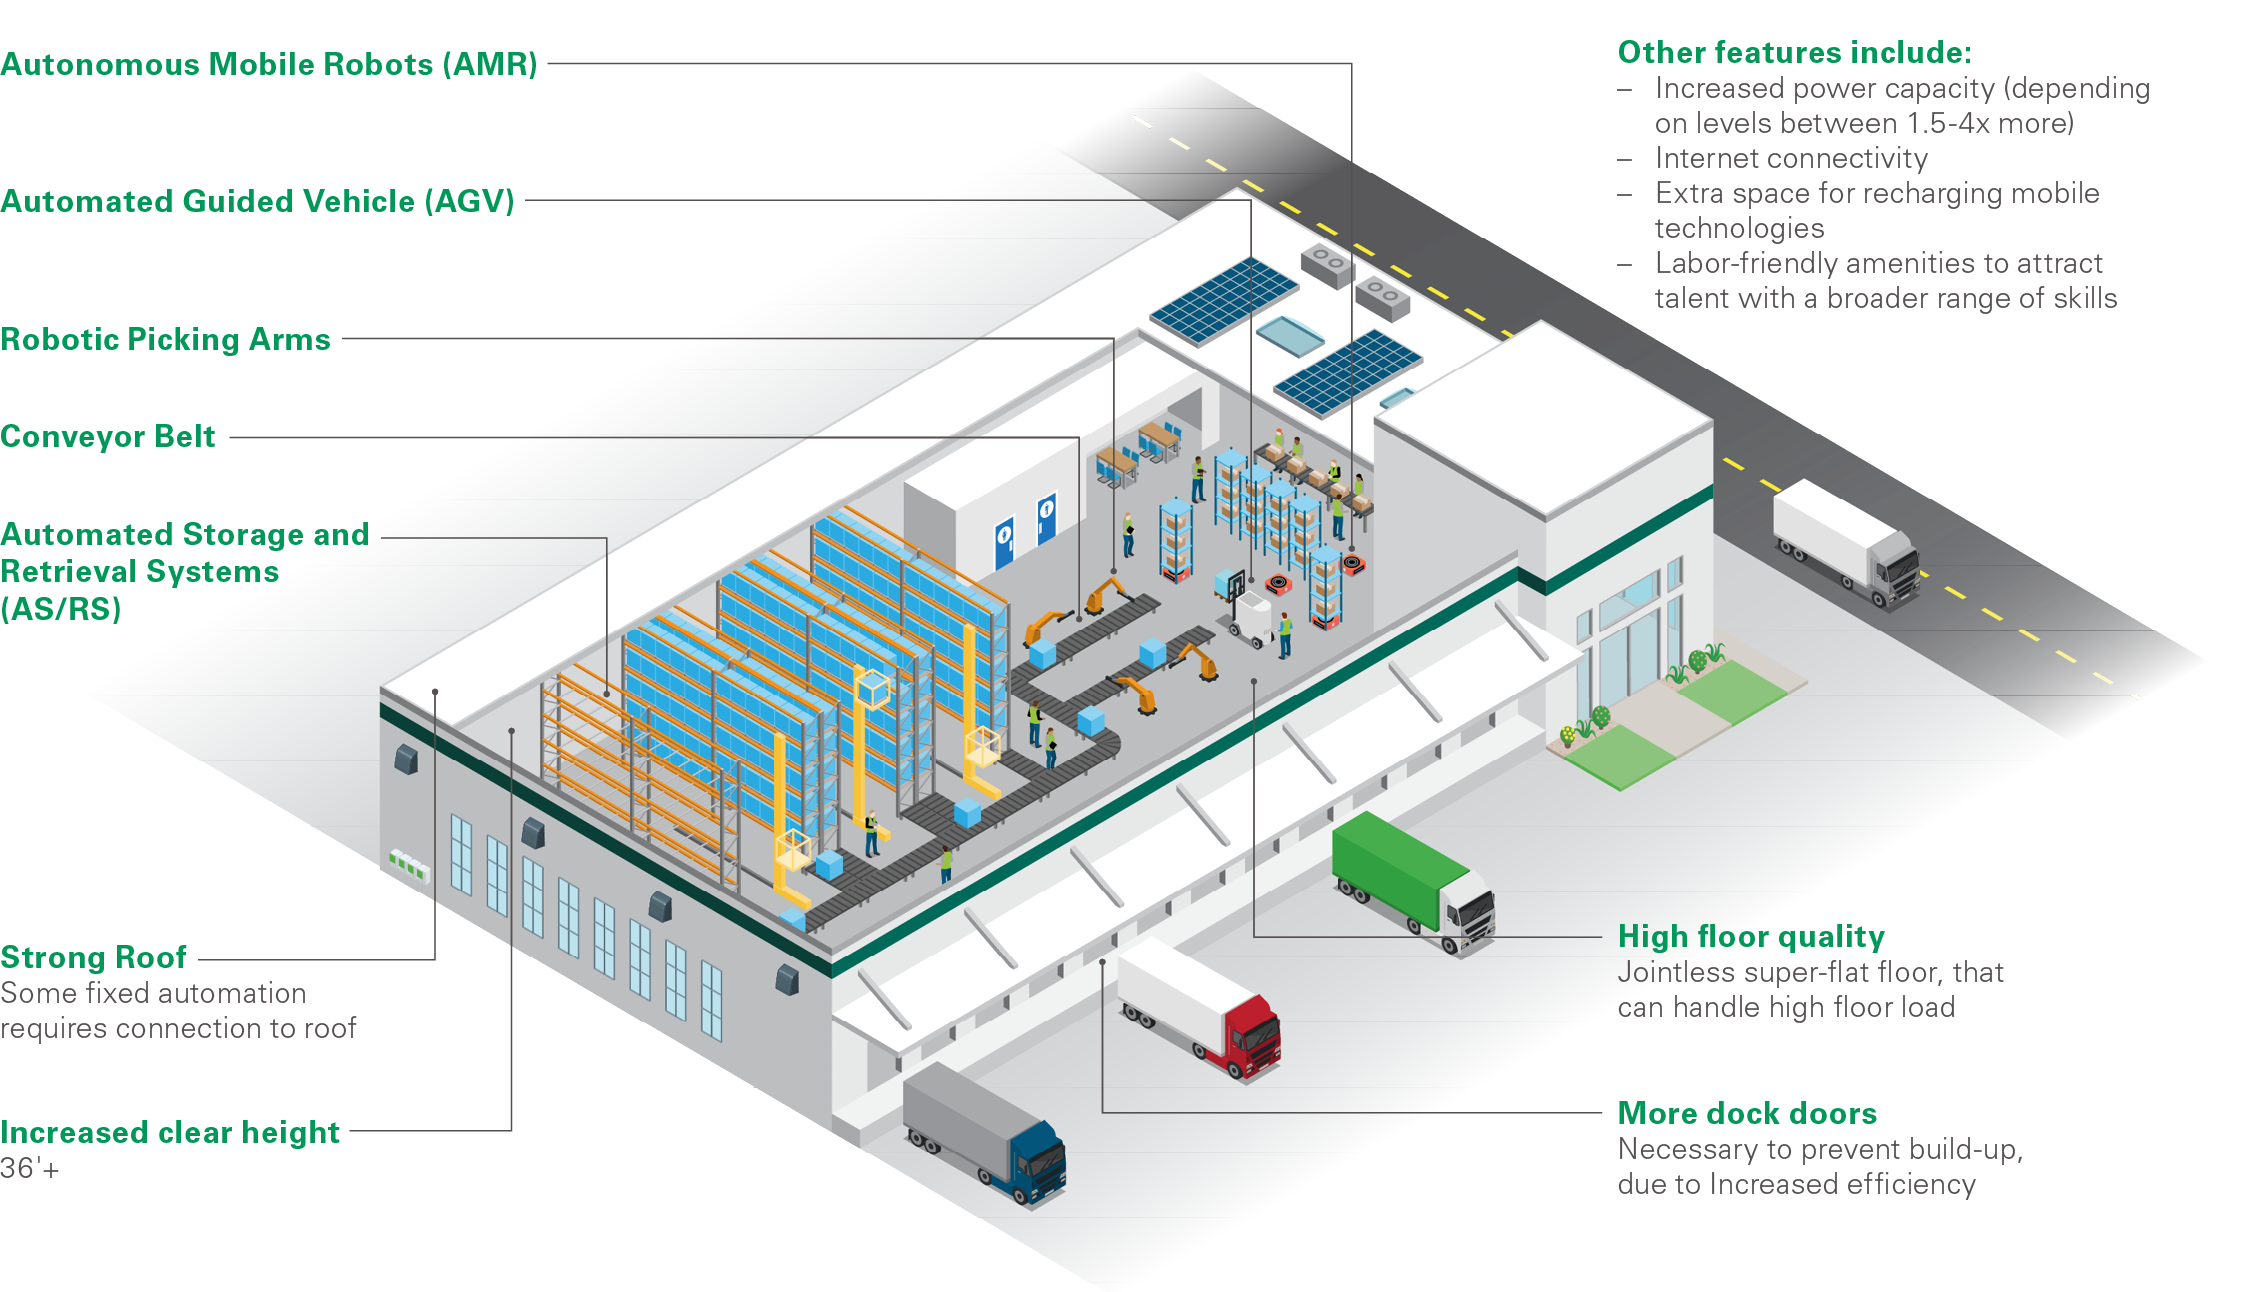 Prologis Research - Automation requirements